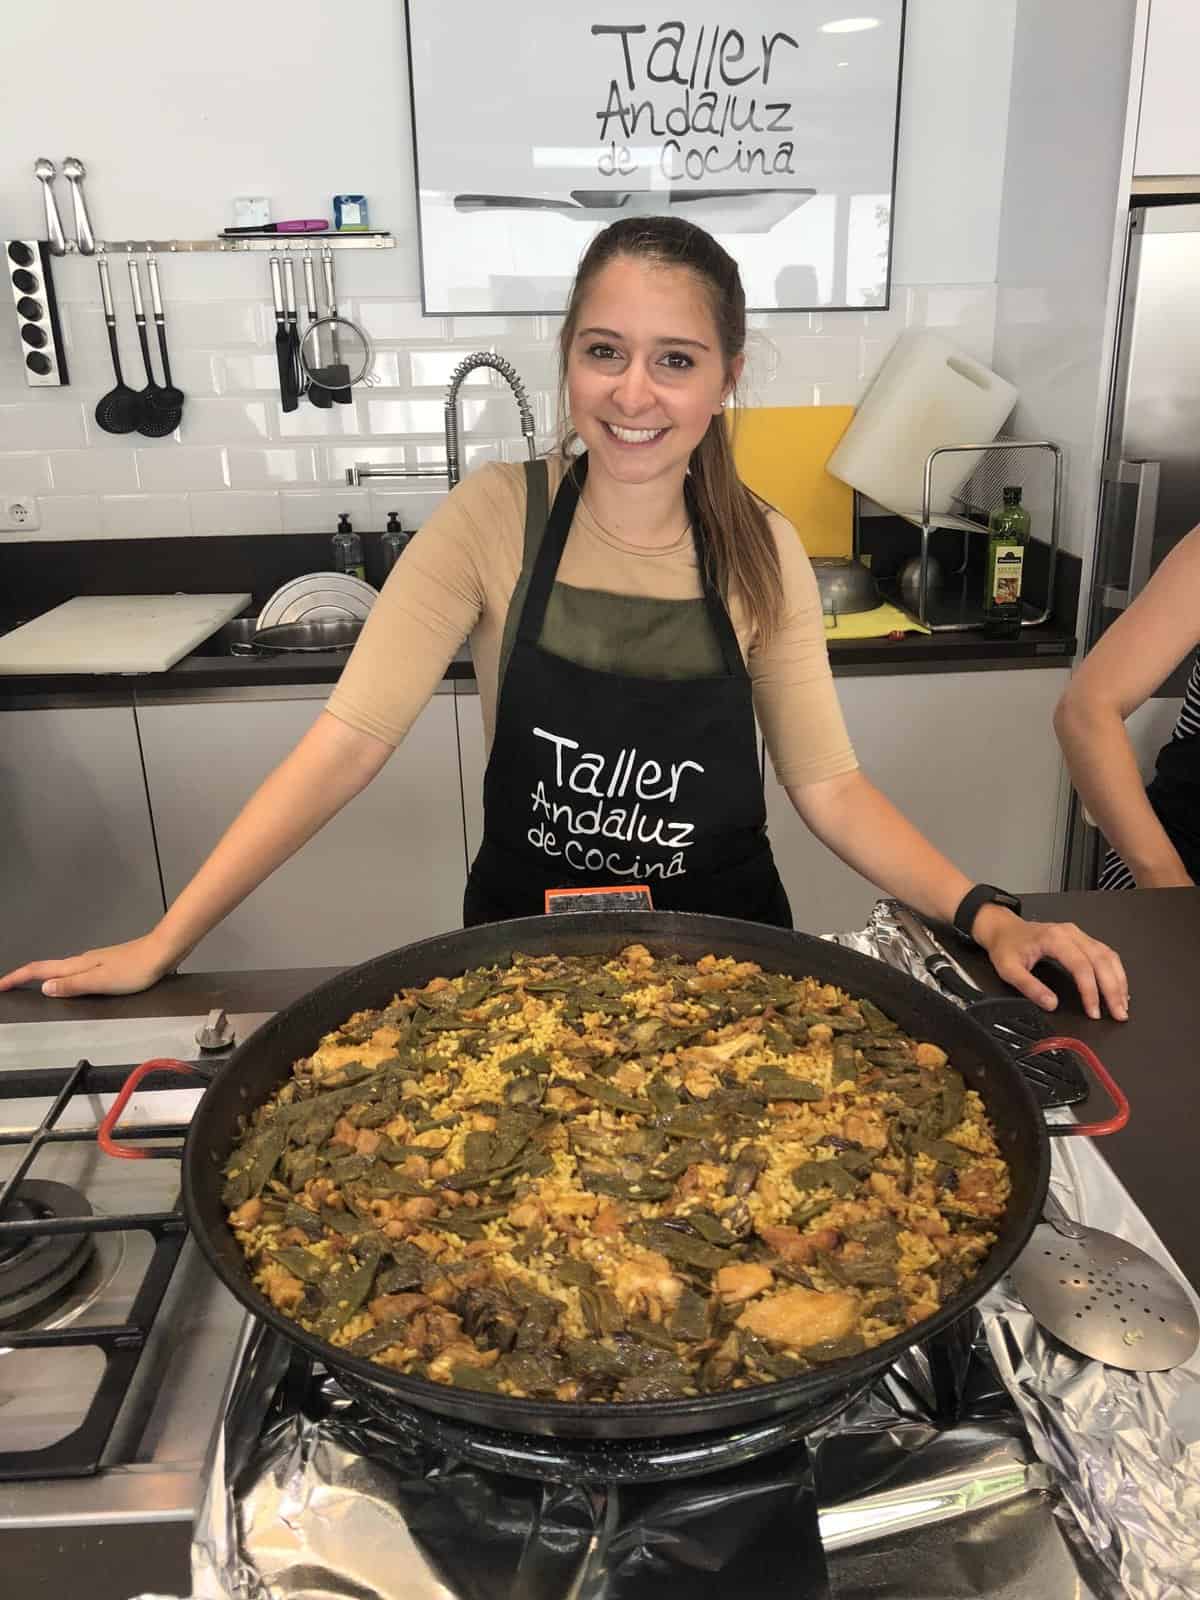 Alexandria standing in front of a large pan of paella in Spain.